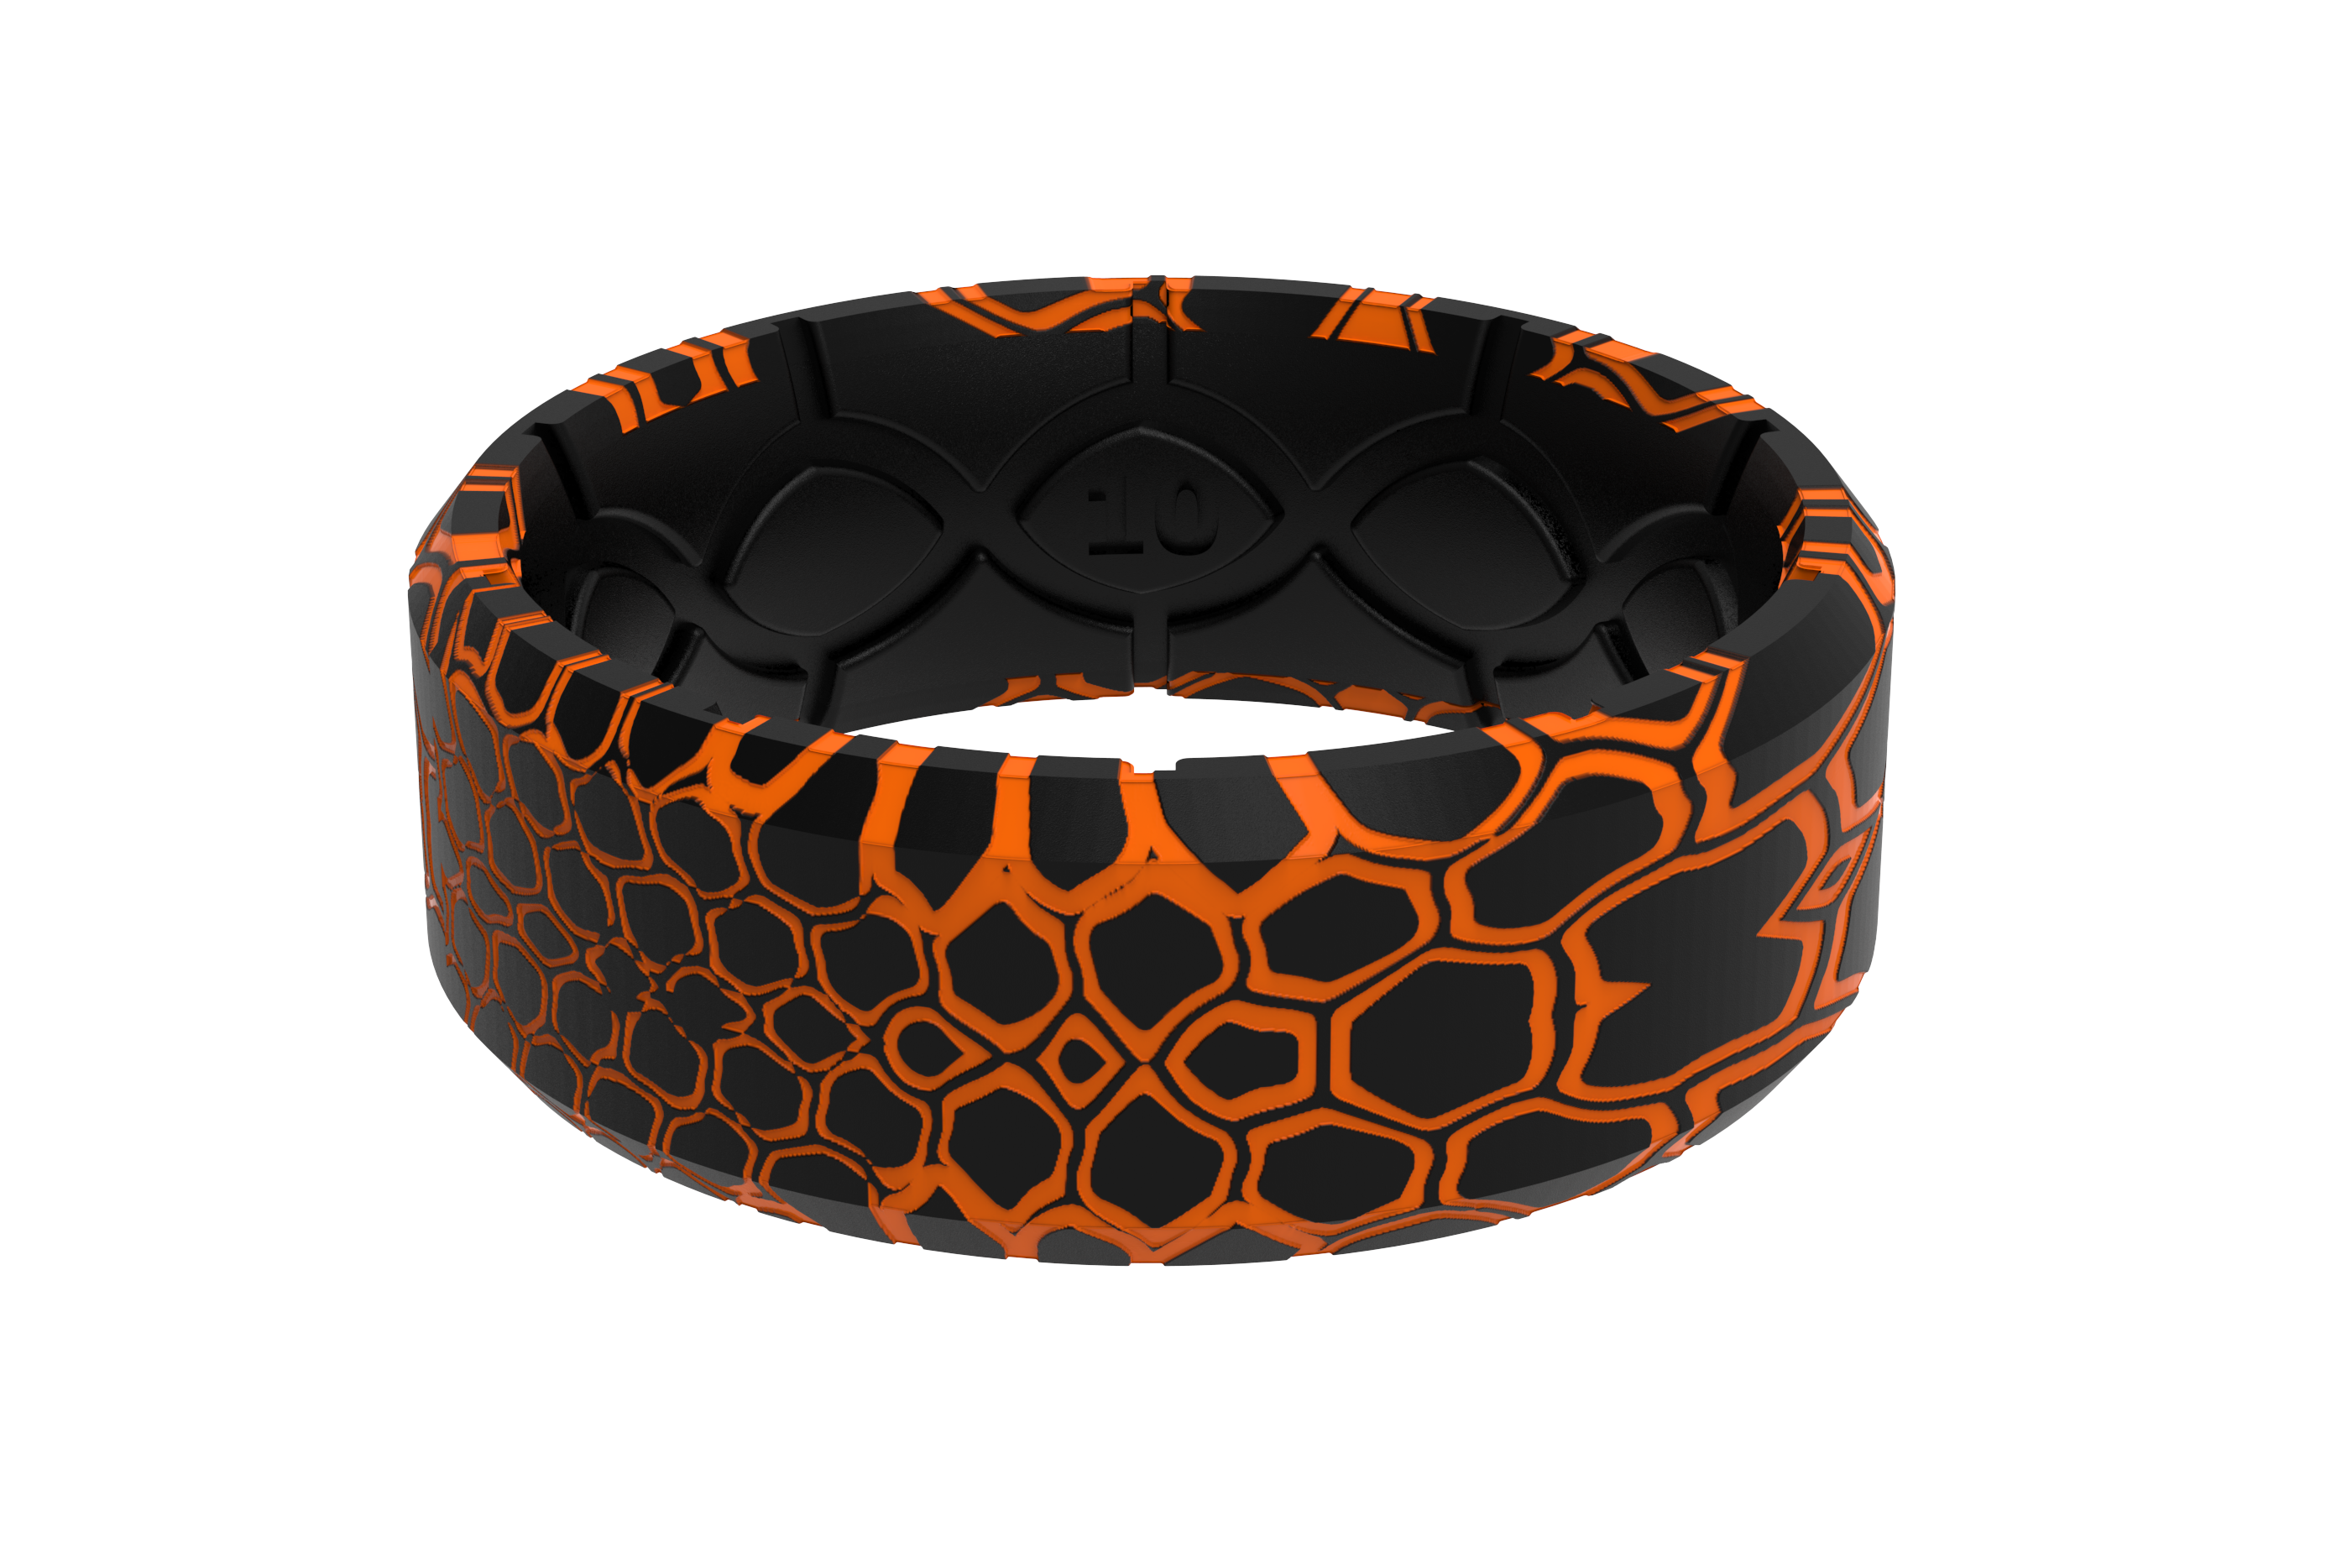 Kryptek Inferno 3D Camo Groove Ring front view